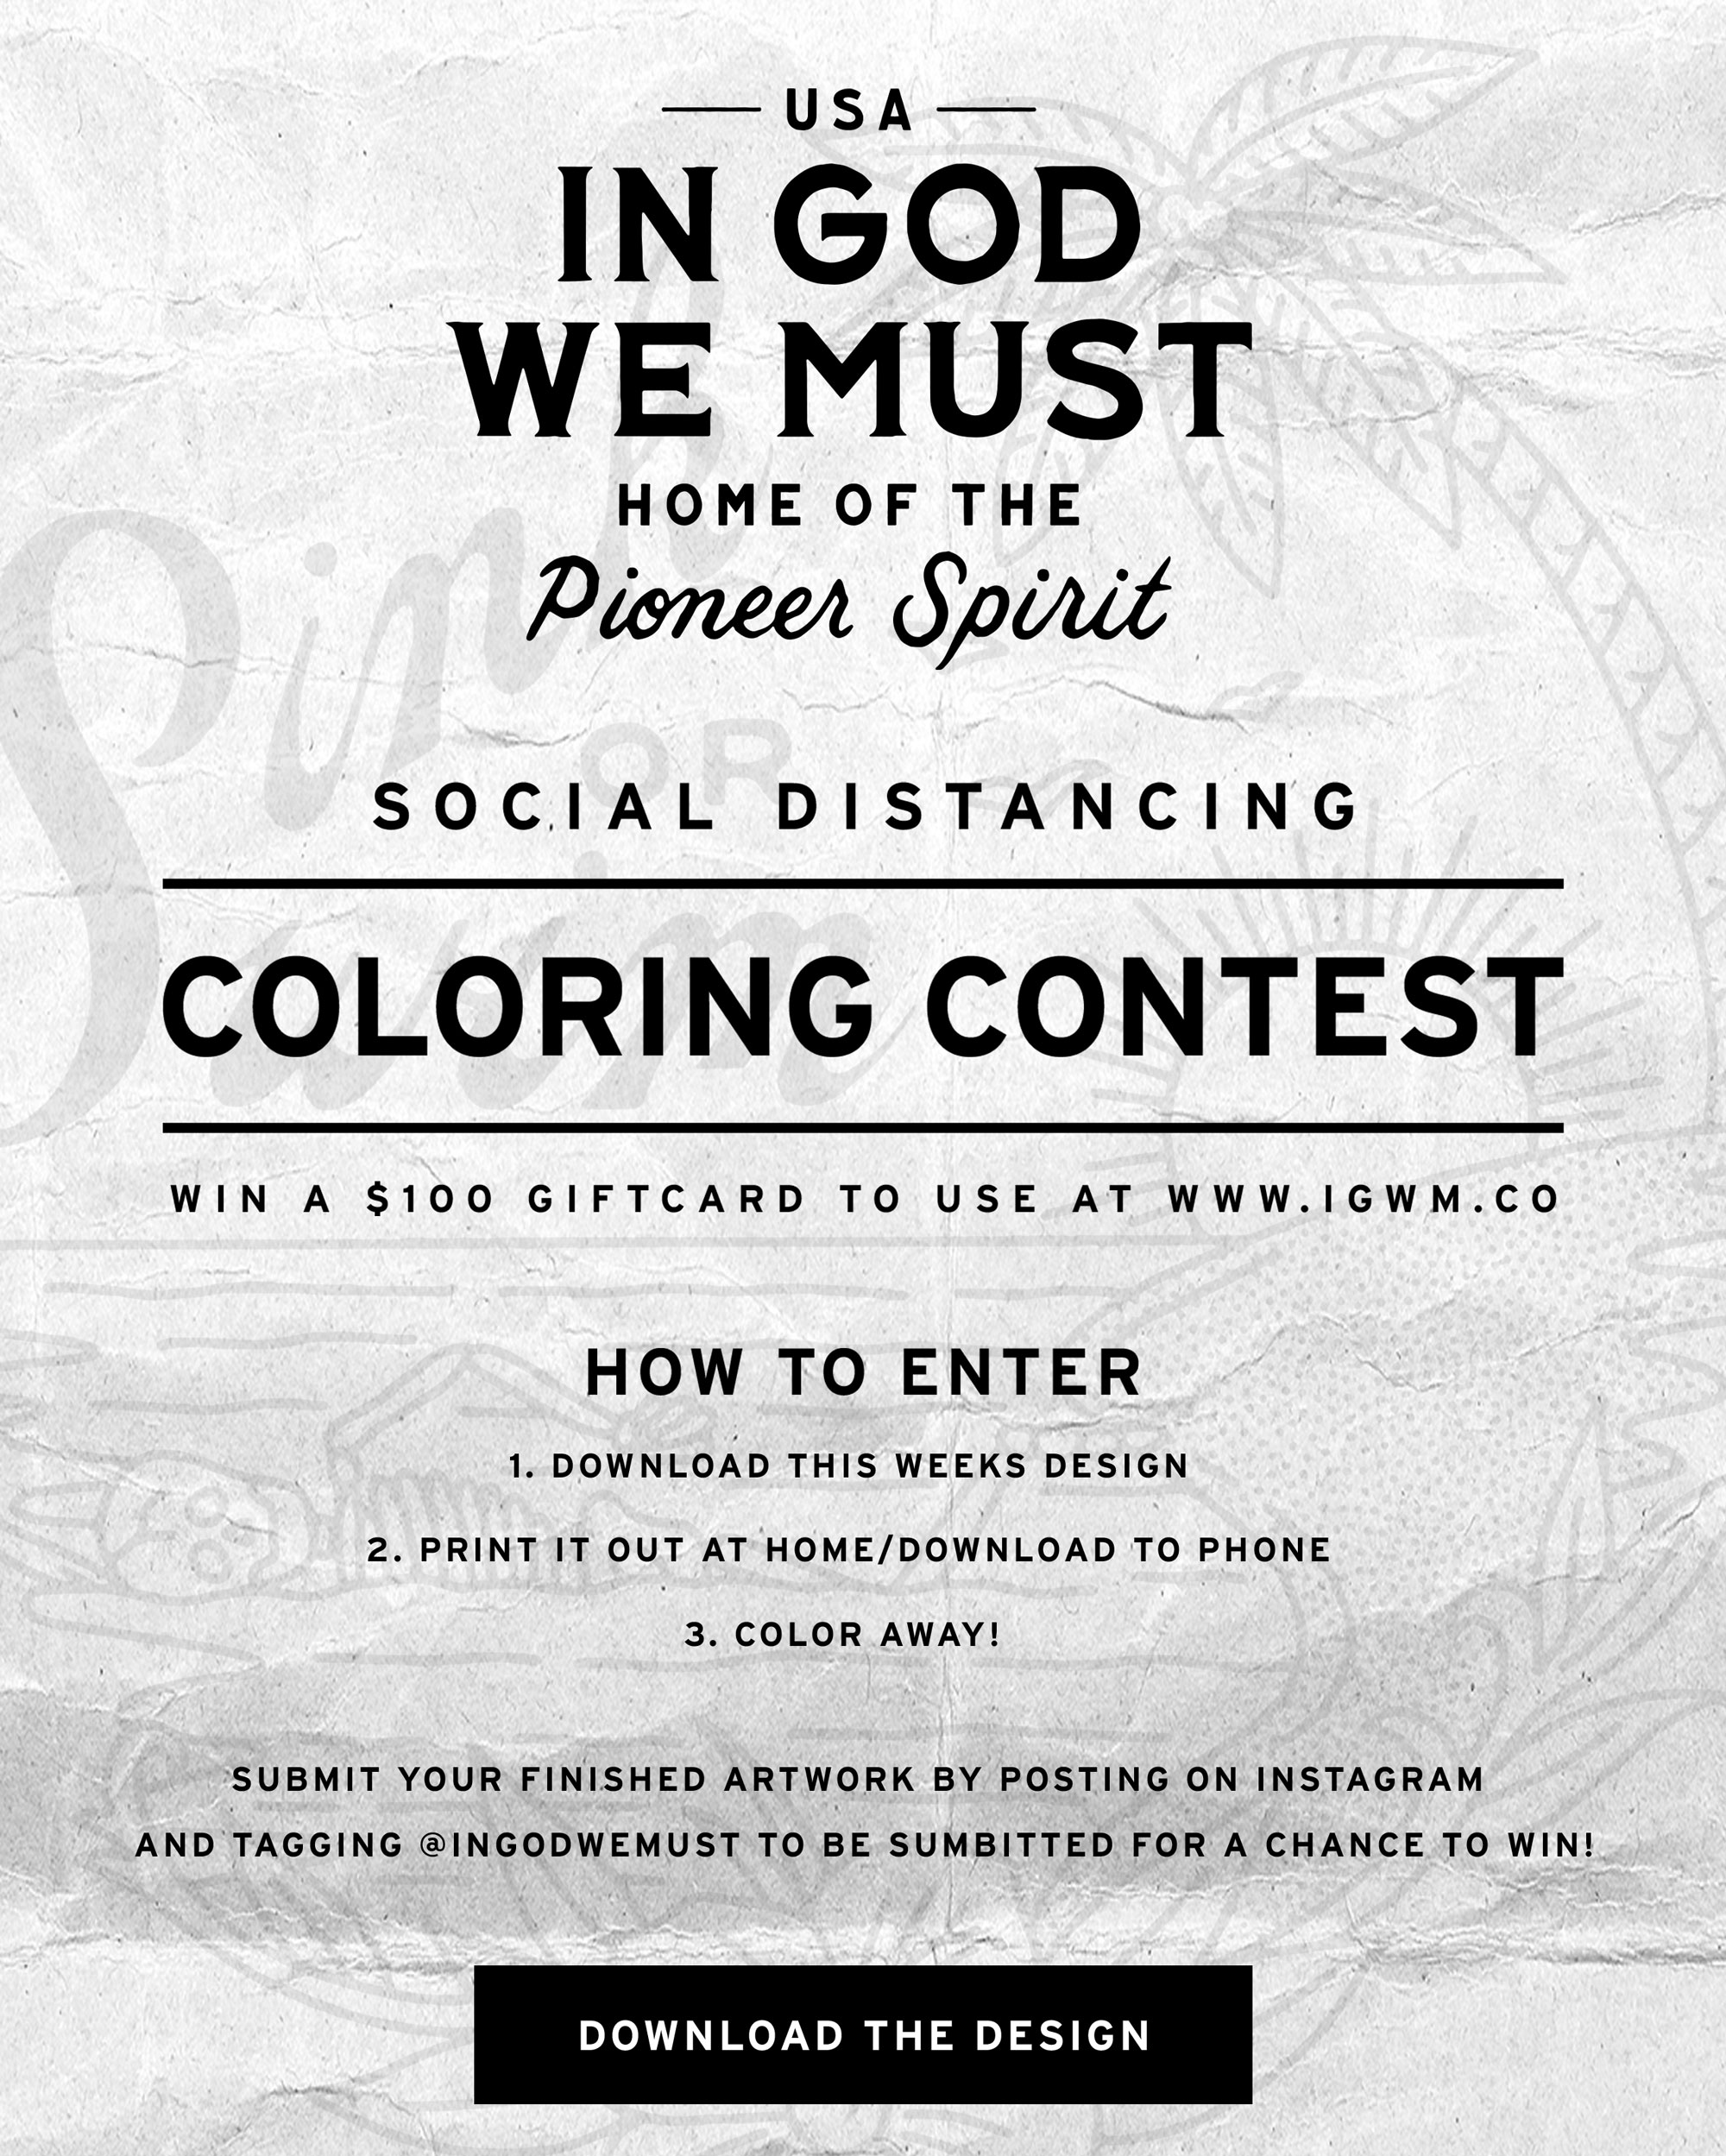 In God We Must - Social Distancing Coloring Contest. Win $100 Gift Card! 